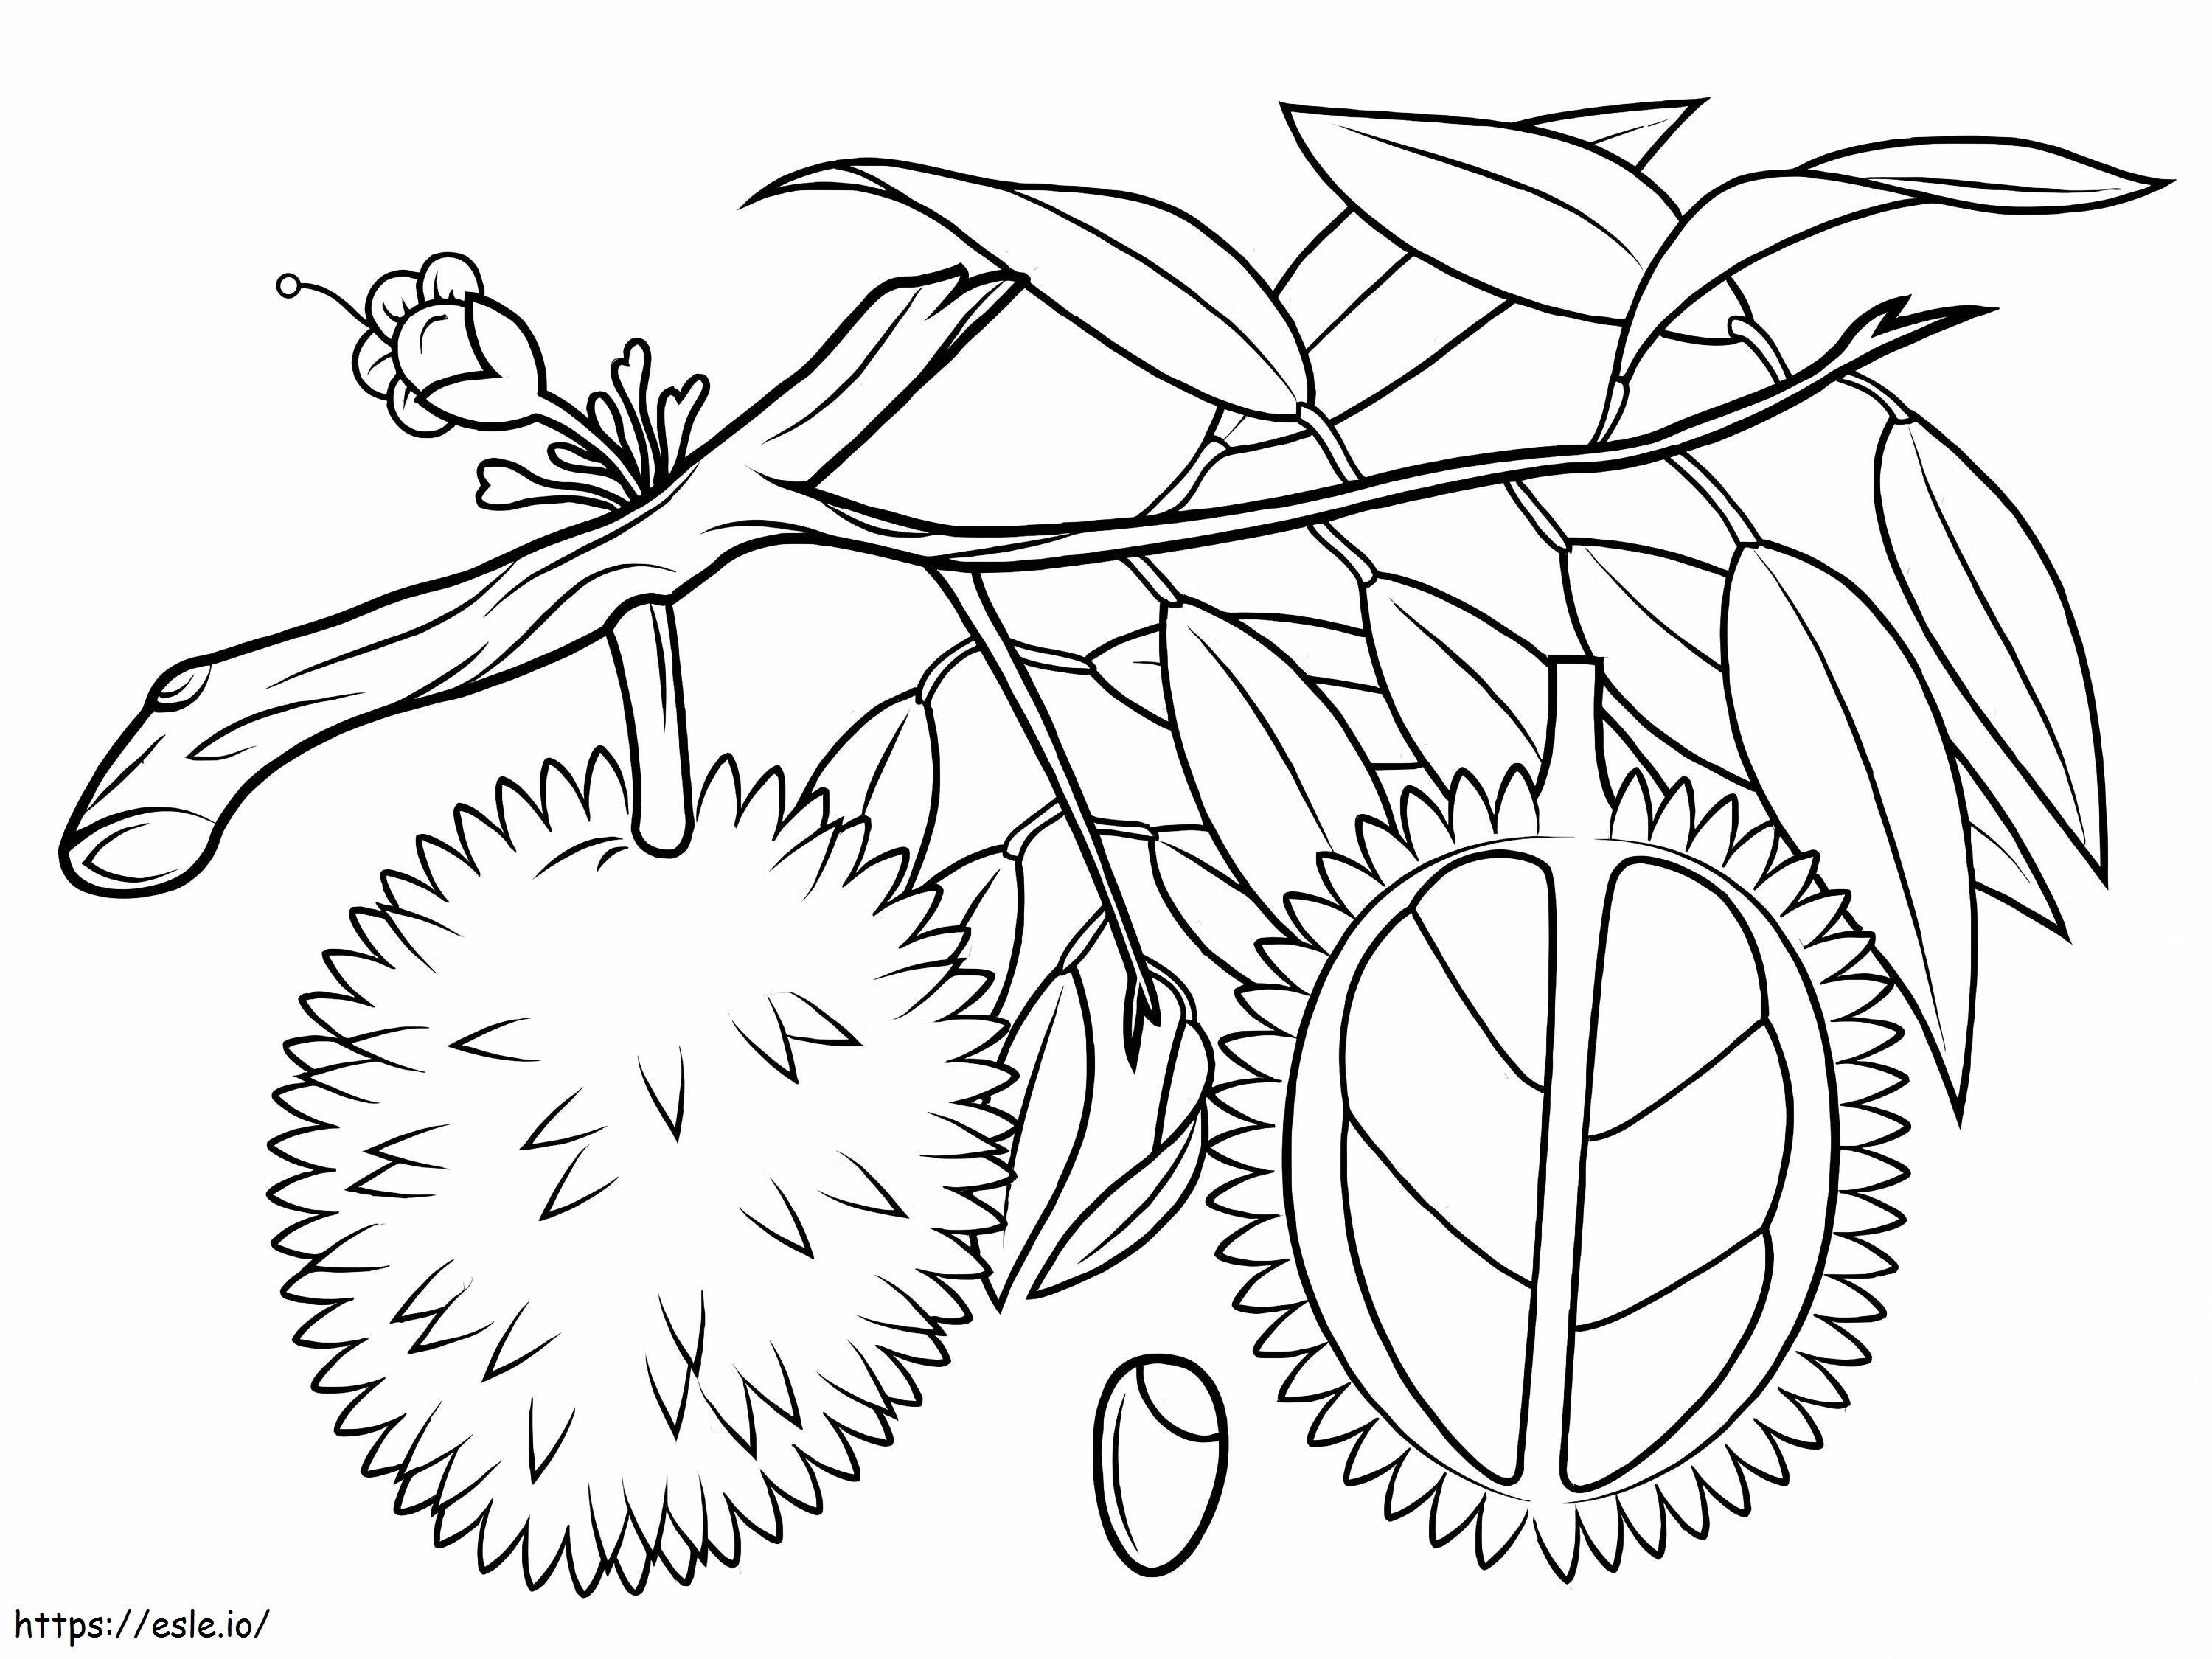 Two Durian On Tree Branch coloring page